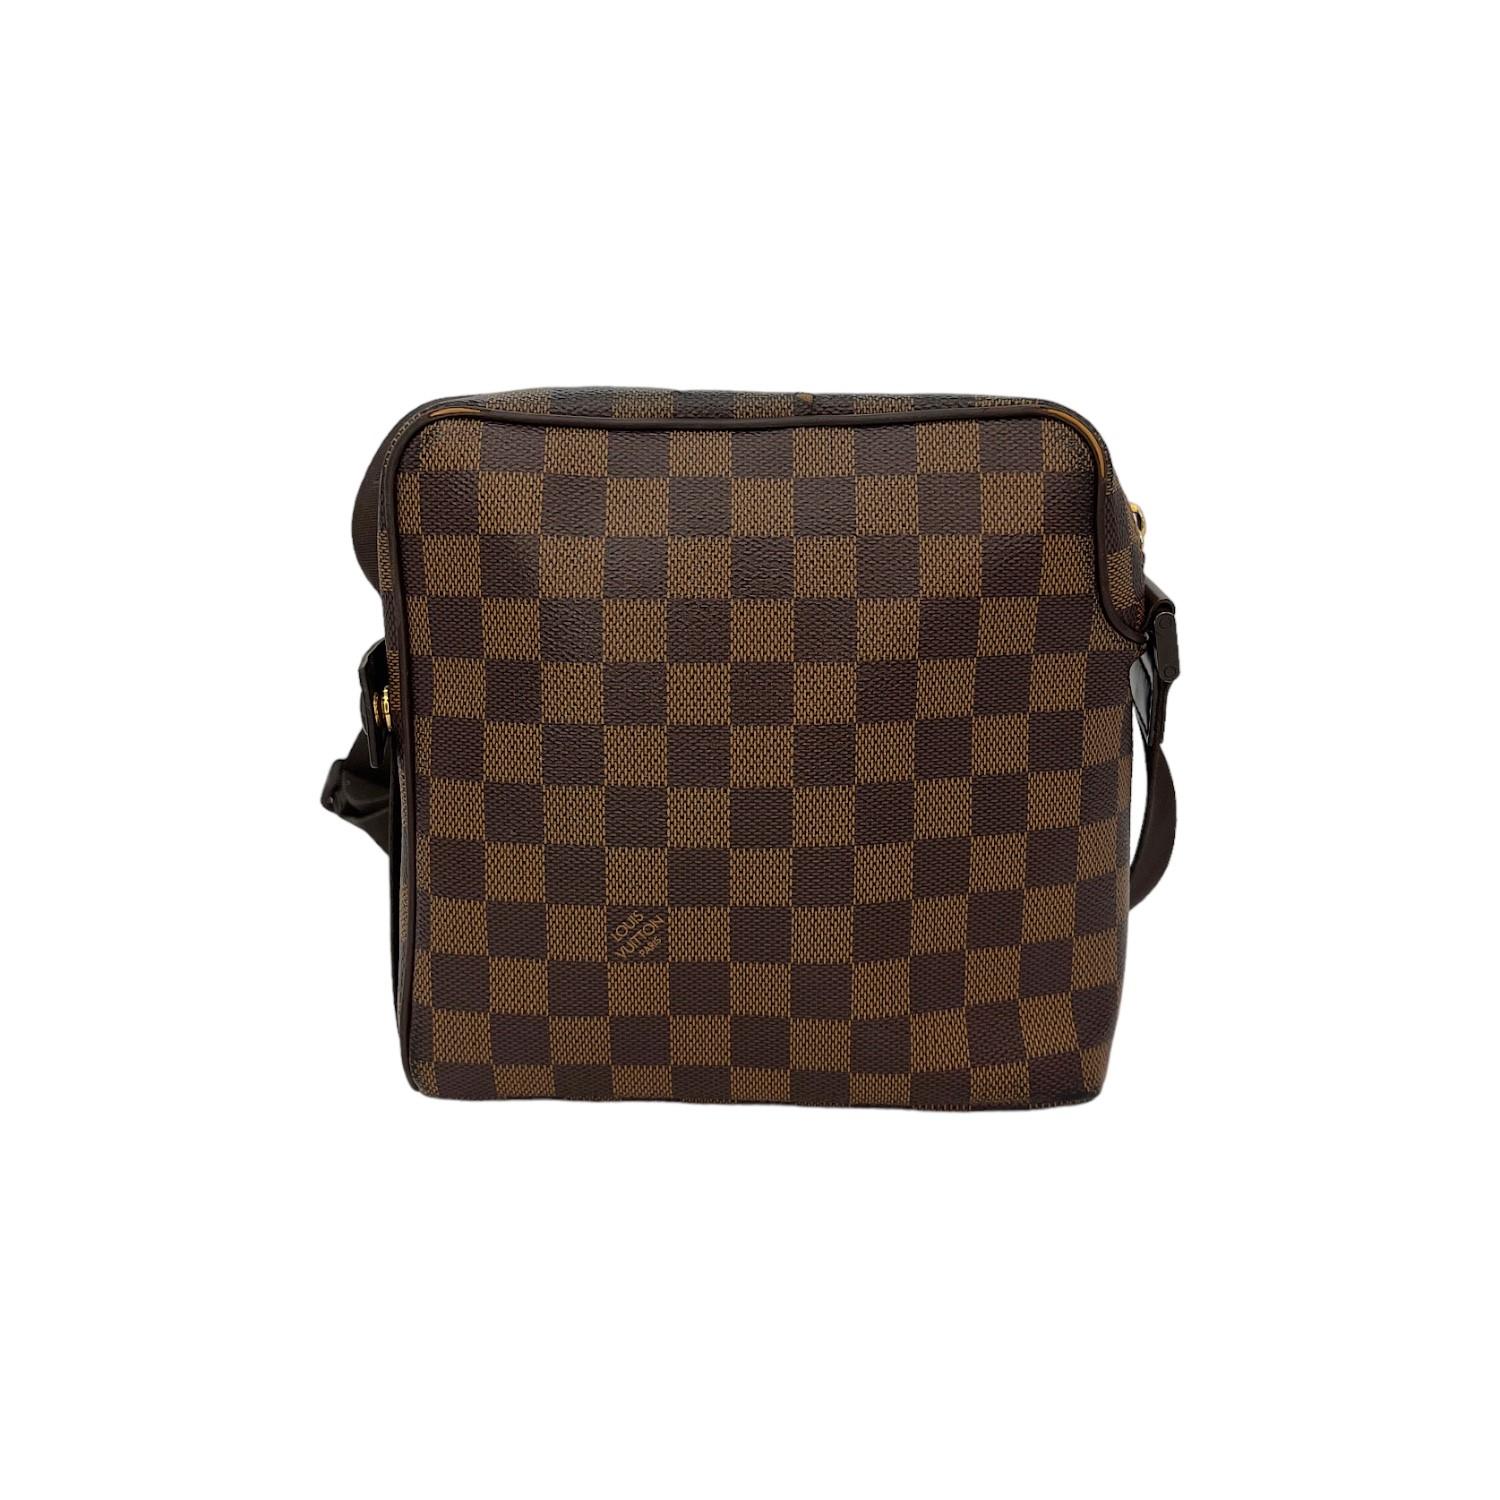 This Louis Vuitton Damier Ebene Olave PM is finely crafted of the classic Louis Vuitton Damier Ebene coated canvas with leather trimming and gold-tone hardware features. It has a flat adjustable shoulder strap. It has a frontal slip pockete. It has